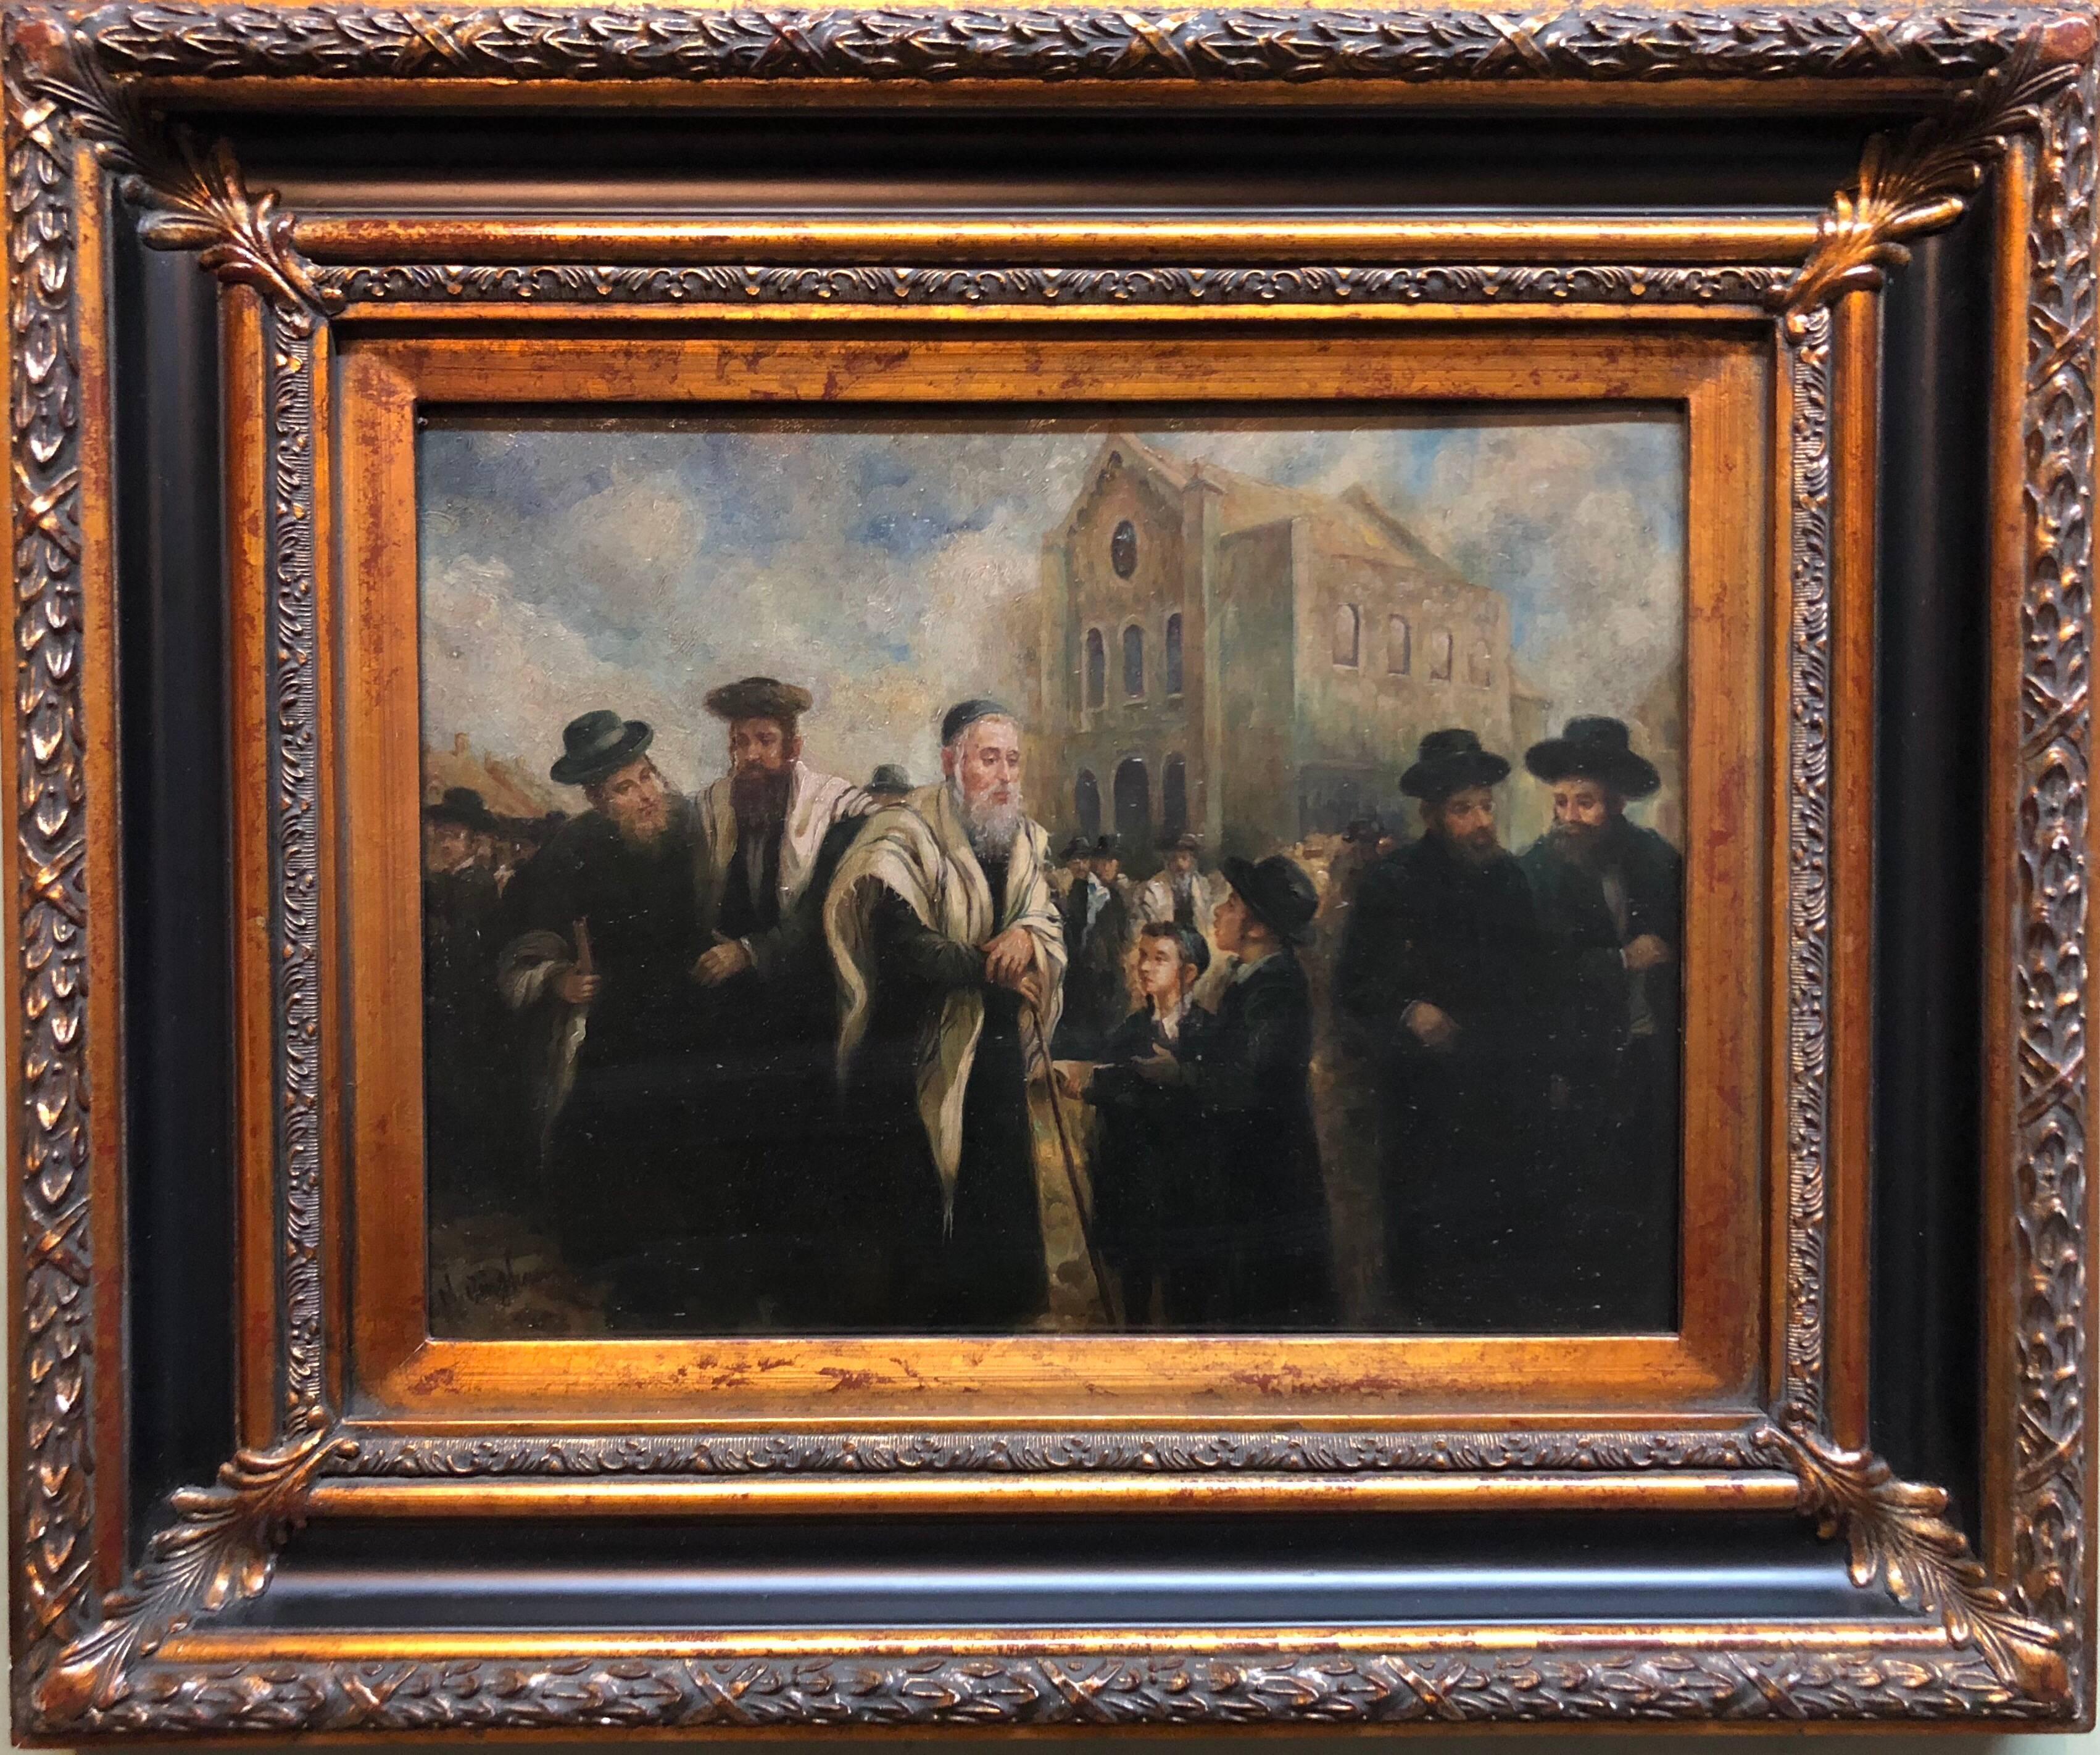 Realistic portrait of an older rabbi visiting and blessing a child in a European marketplace. Here the artist conveys a sense of quiet grandeur through the eyes of his subject and the way it's rendered. following a distinguished European lineage of